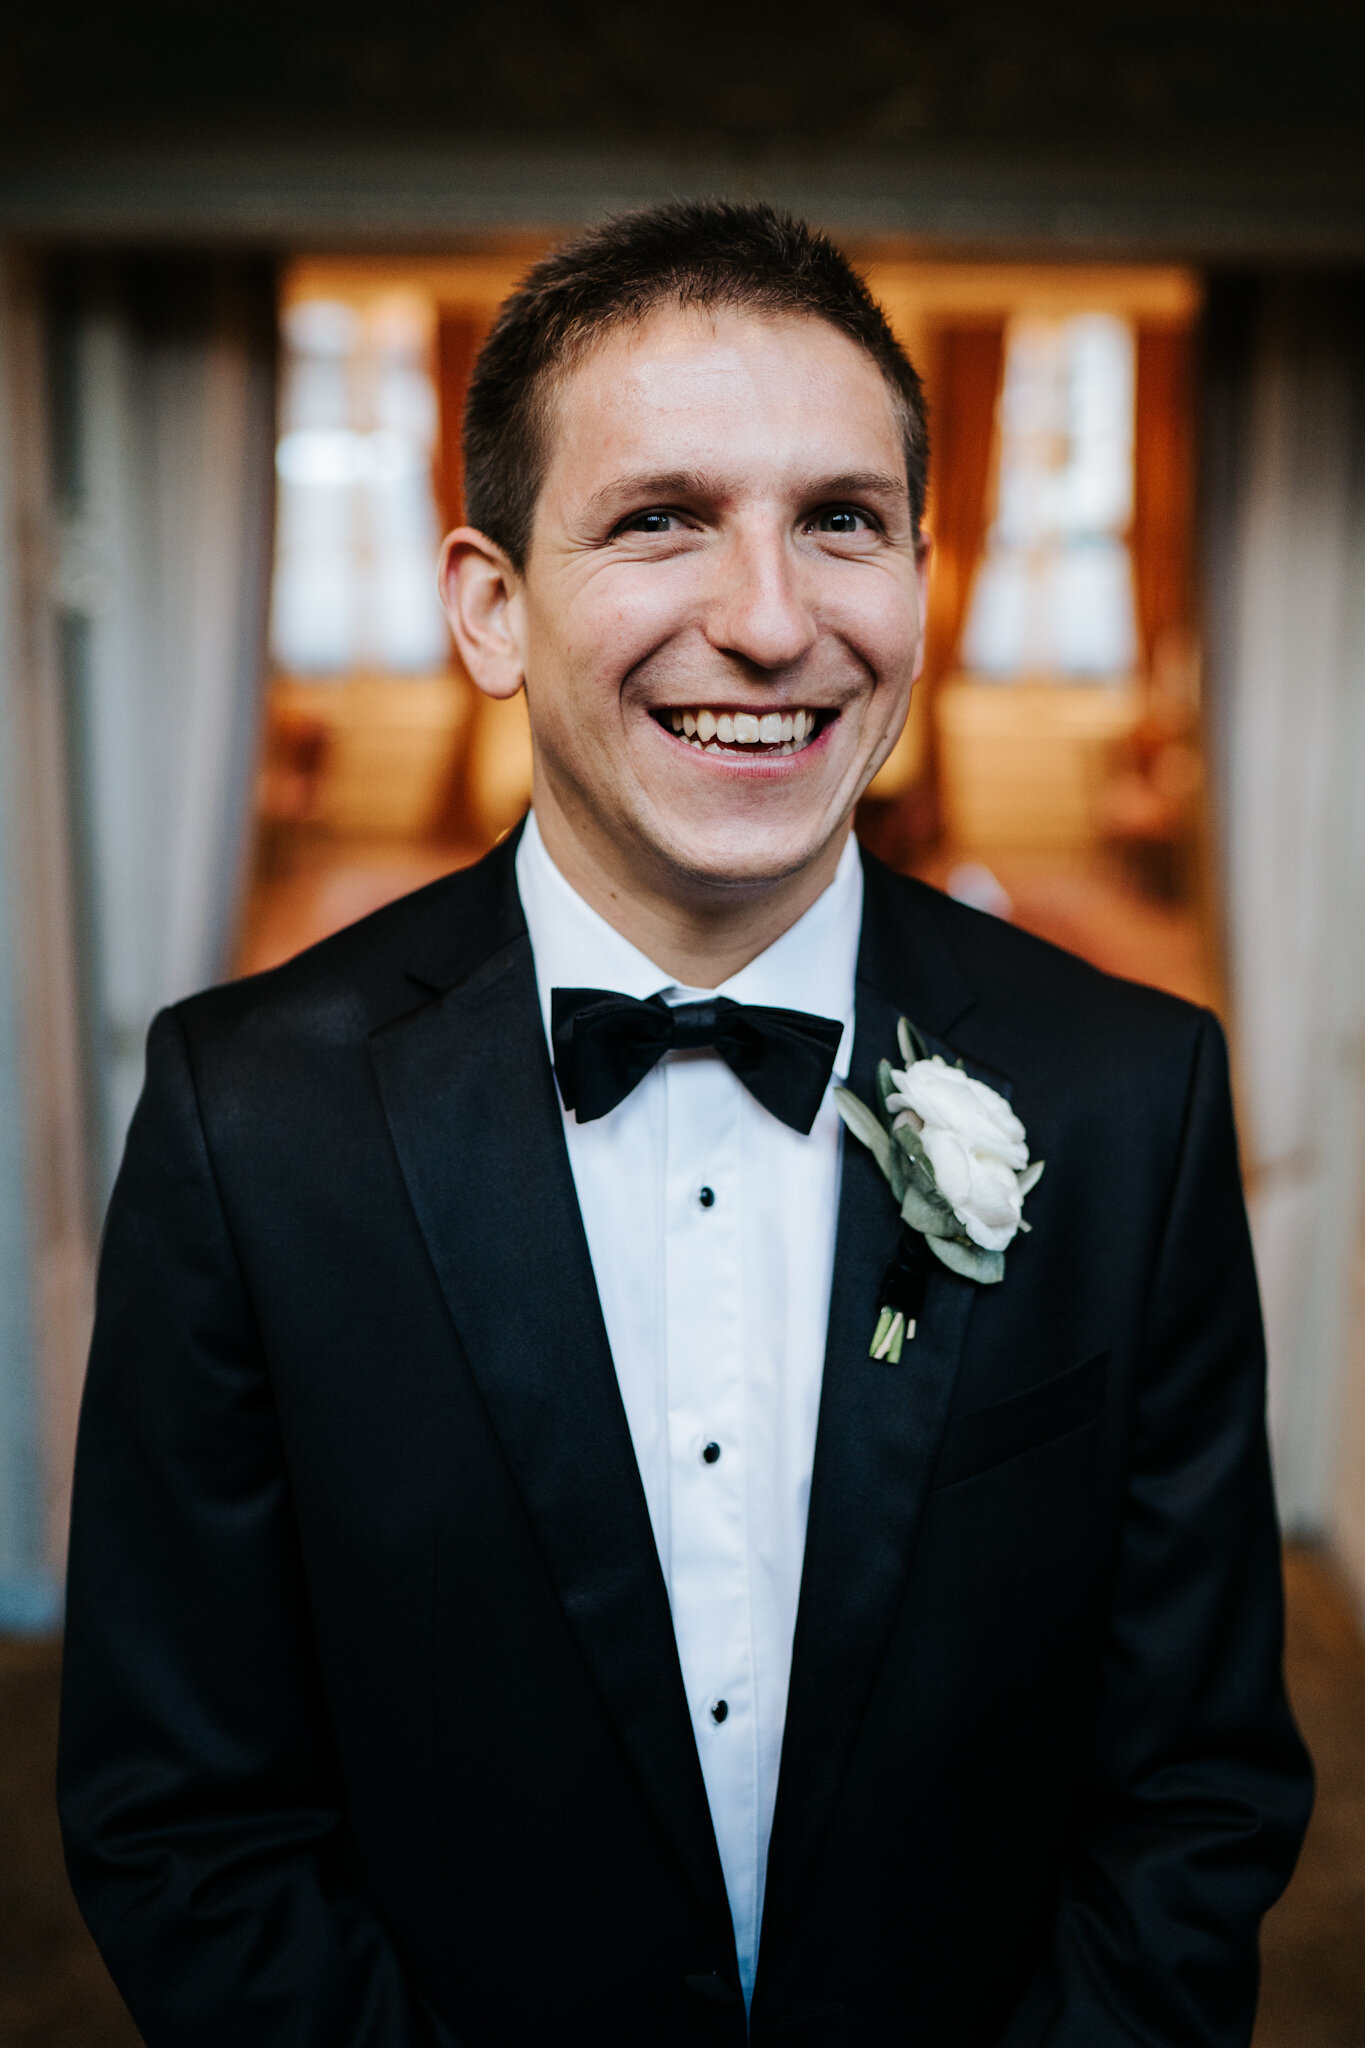 Portrait of the groom on the stairs at Savile Club London as bride, off-frame, makes him smile